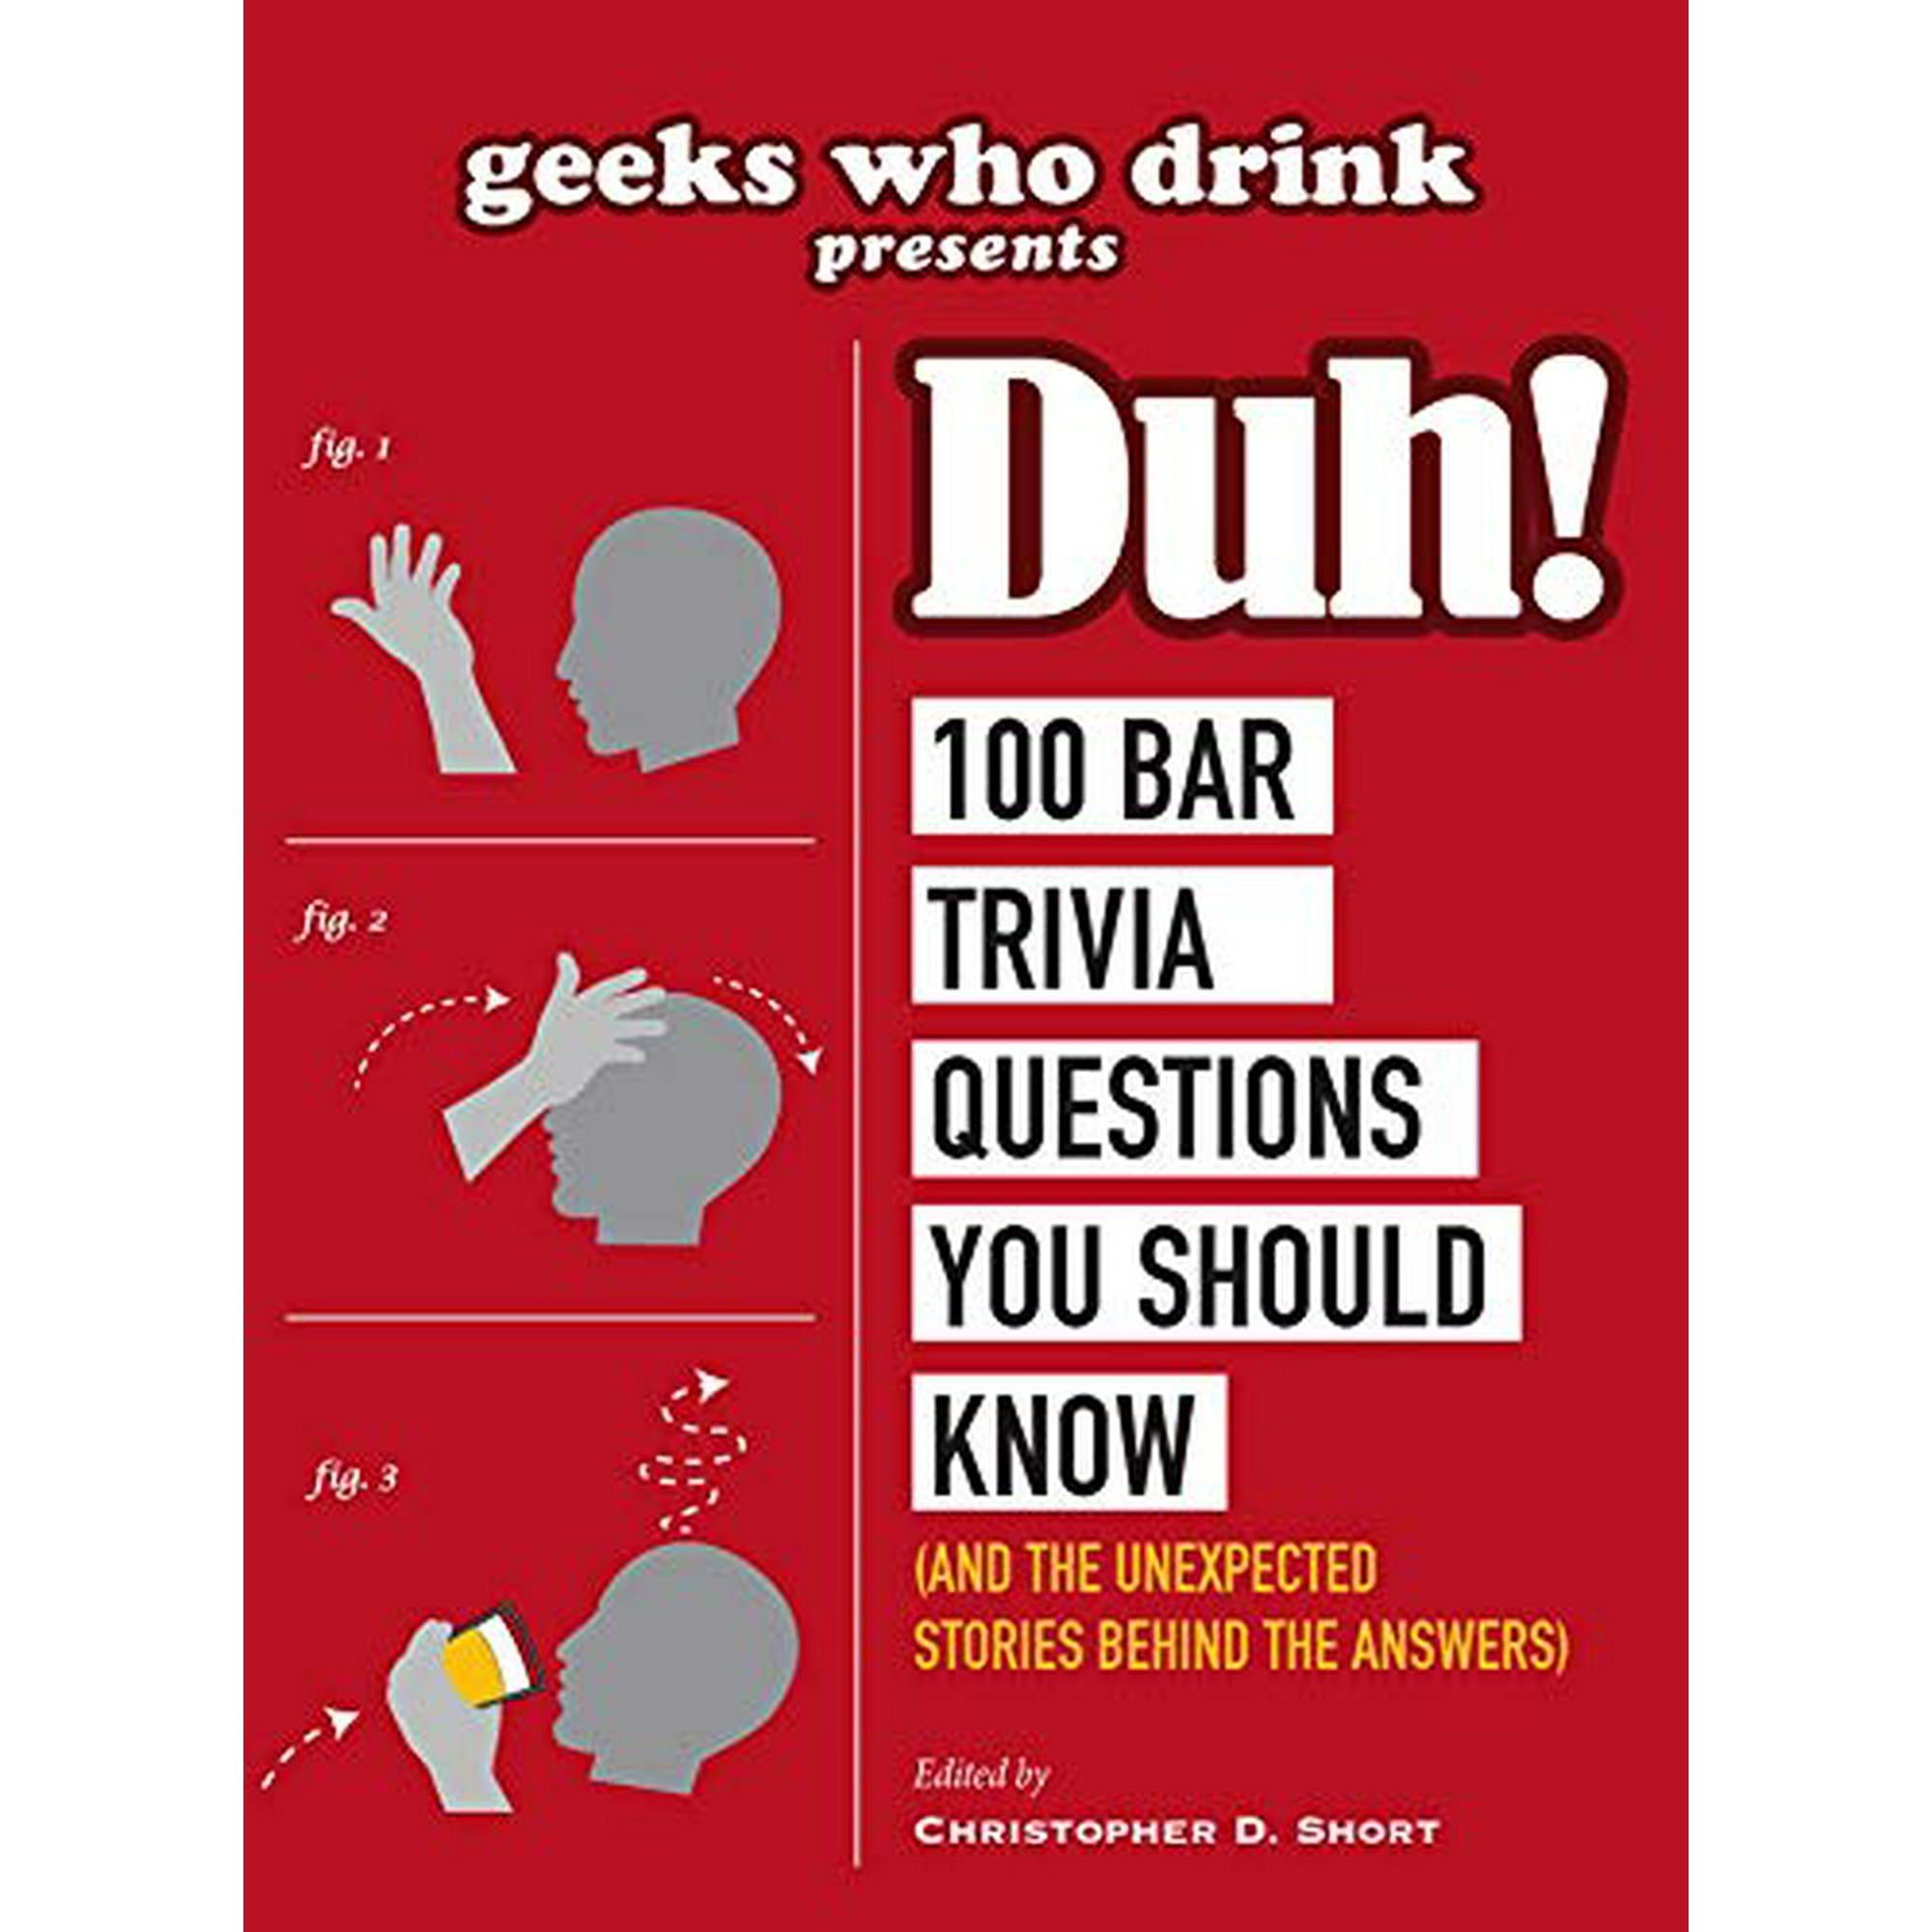 Geeks Who Drink Presents Duh 100 Bar Trivia Questions You Should Know And The Unexpected Stories Behind The Answers Walmart Canada